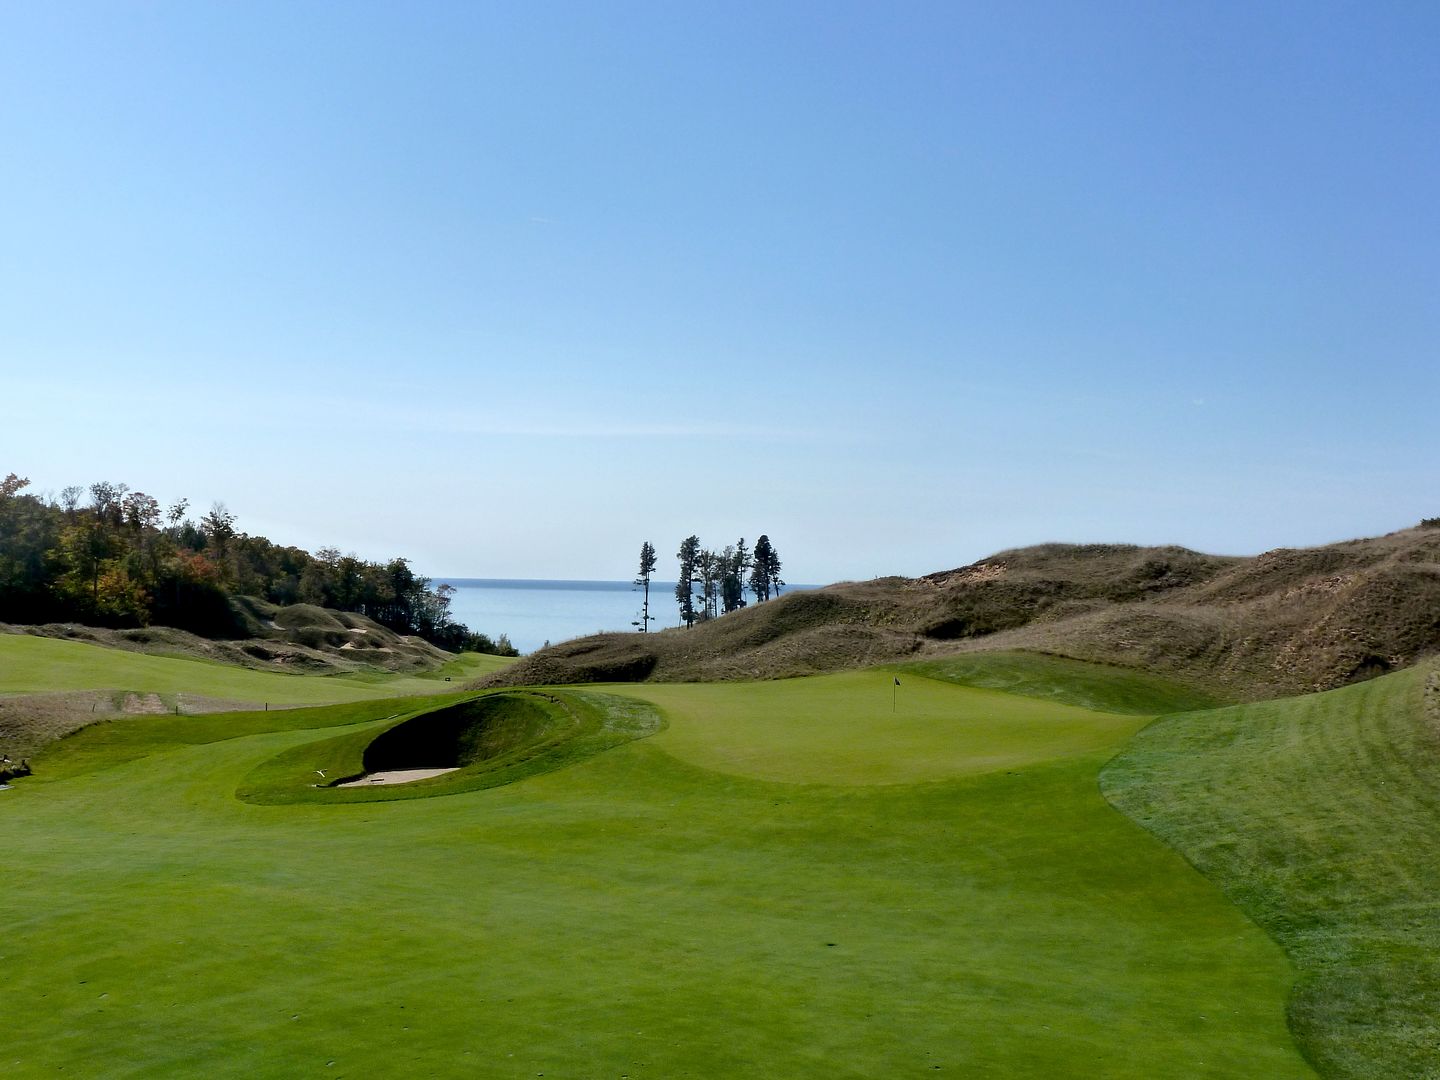 Arcadia Bluffs Pictures